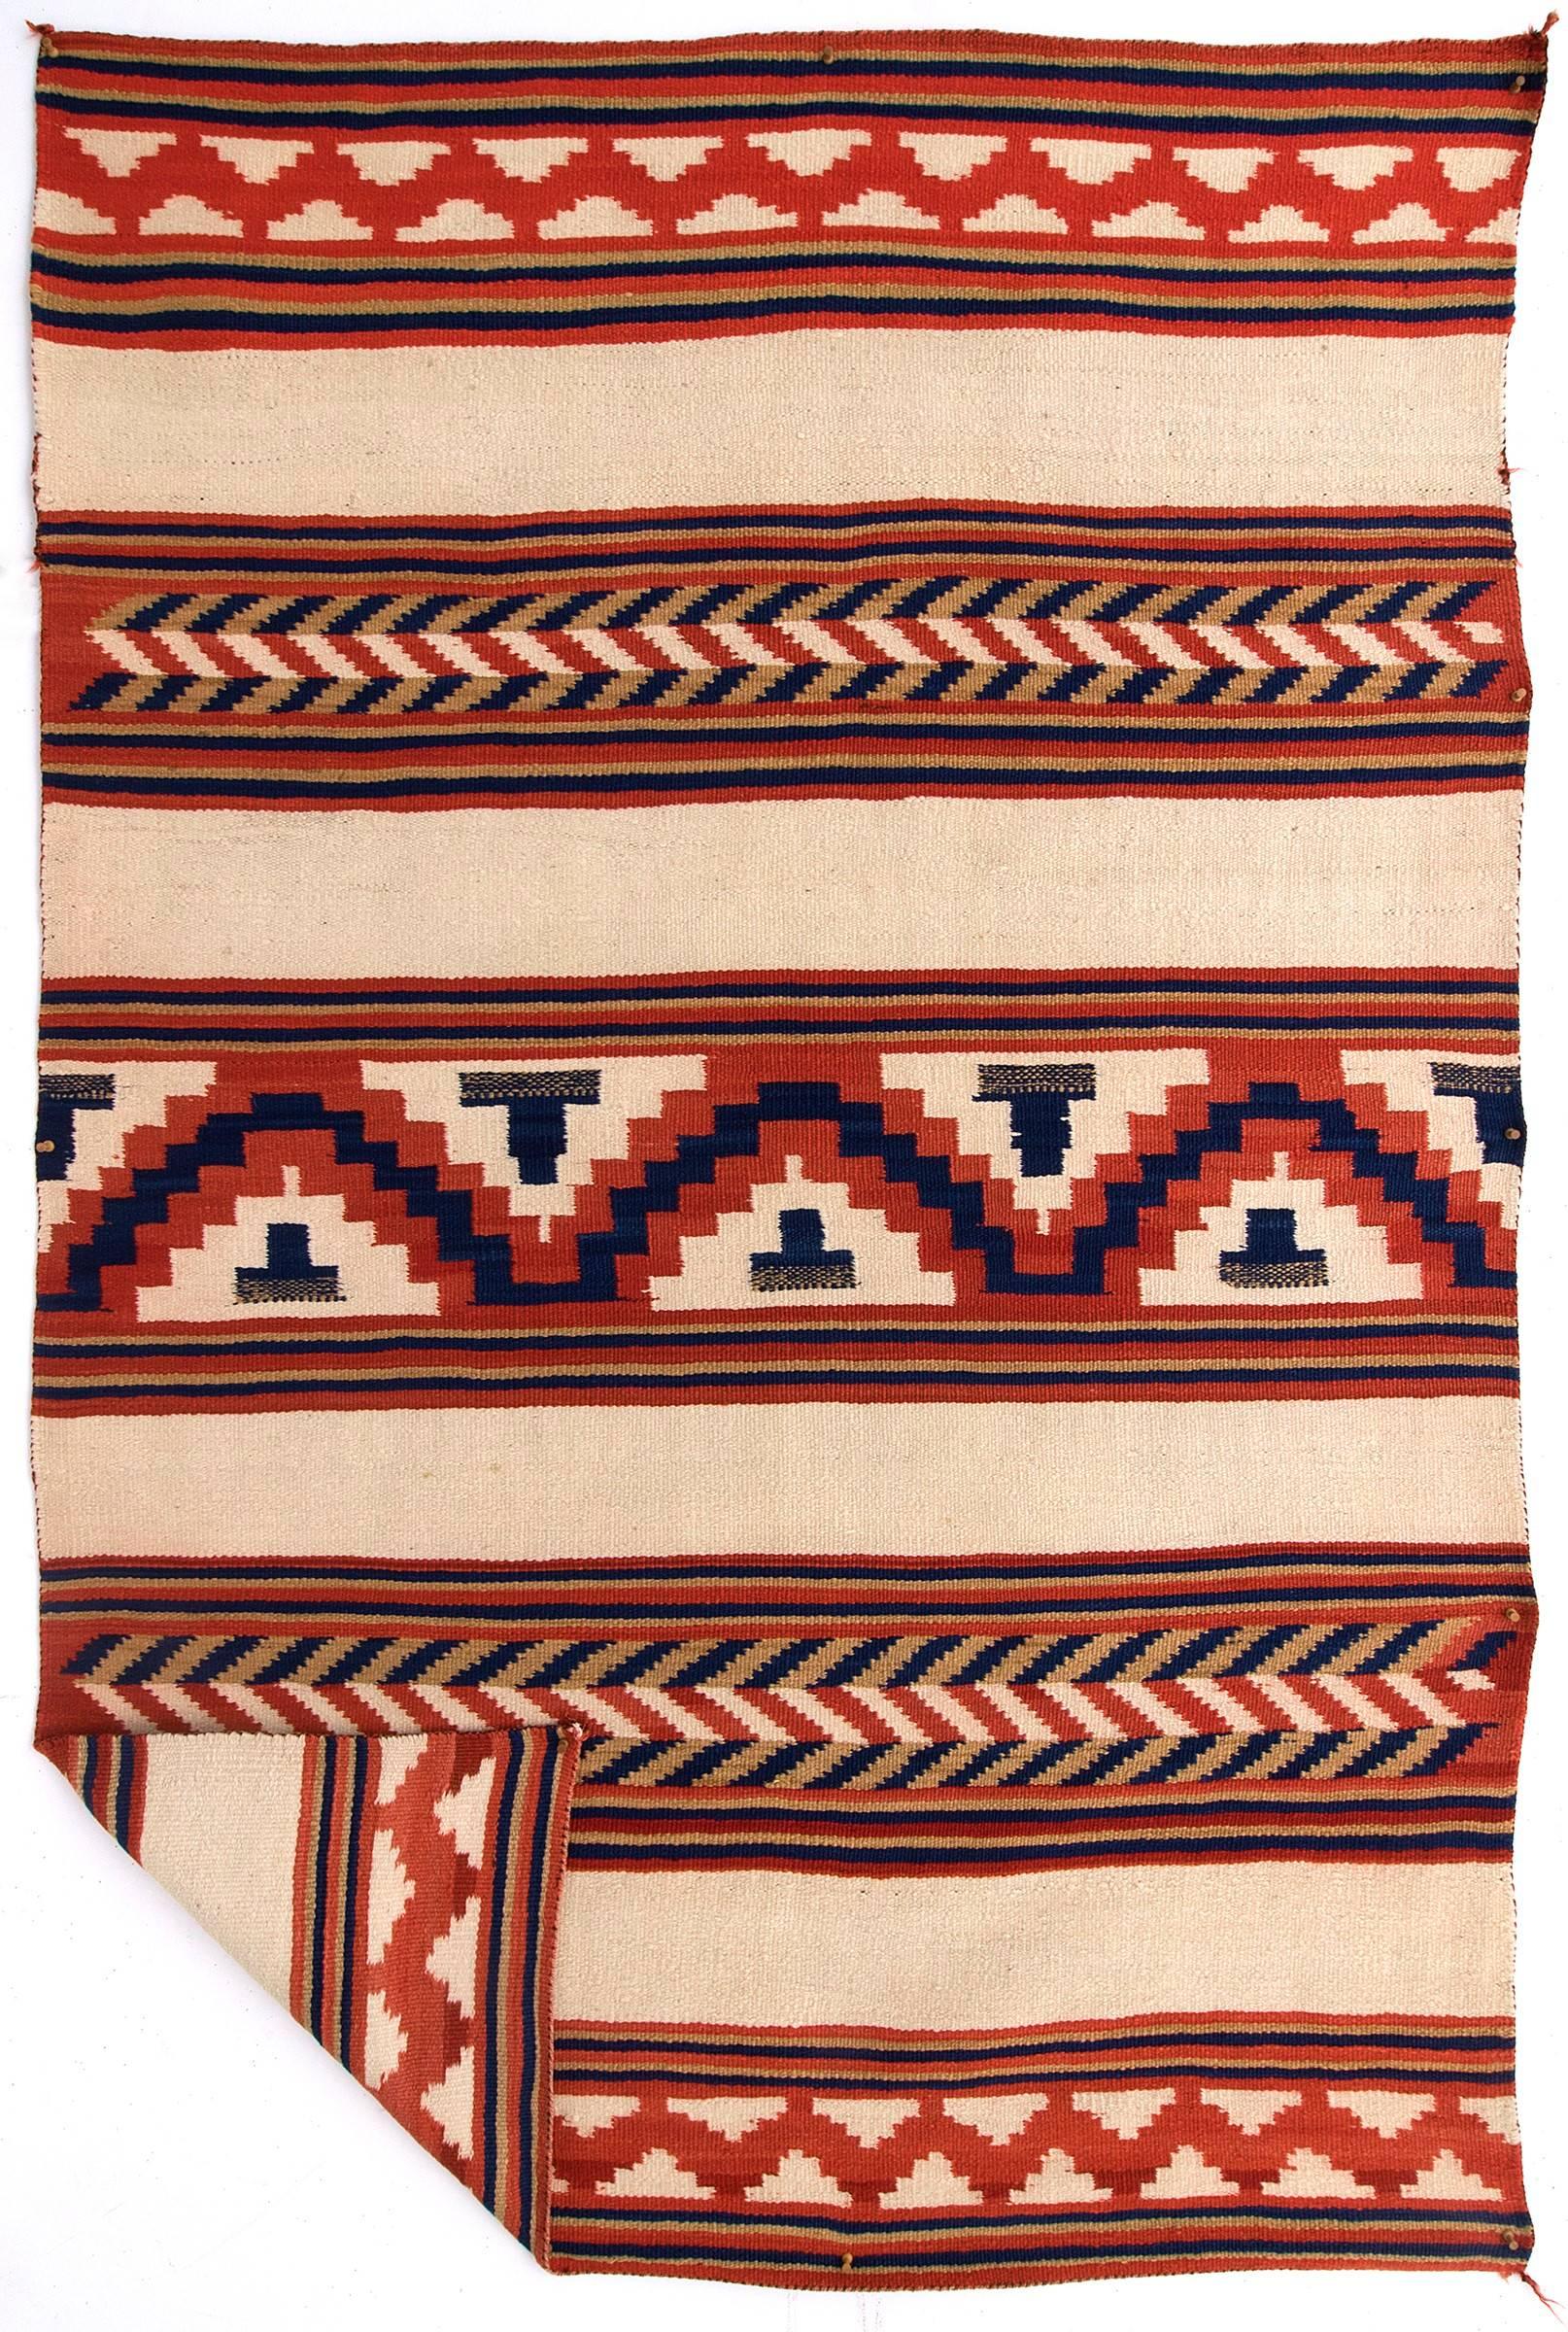 A late Classic period Sarape. This rare textile is woven of native hand-spun wool with natural indigo and aniline dye.

